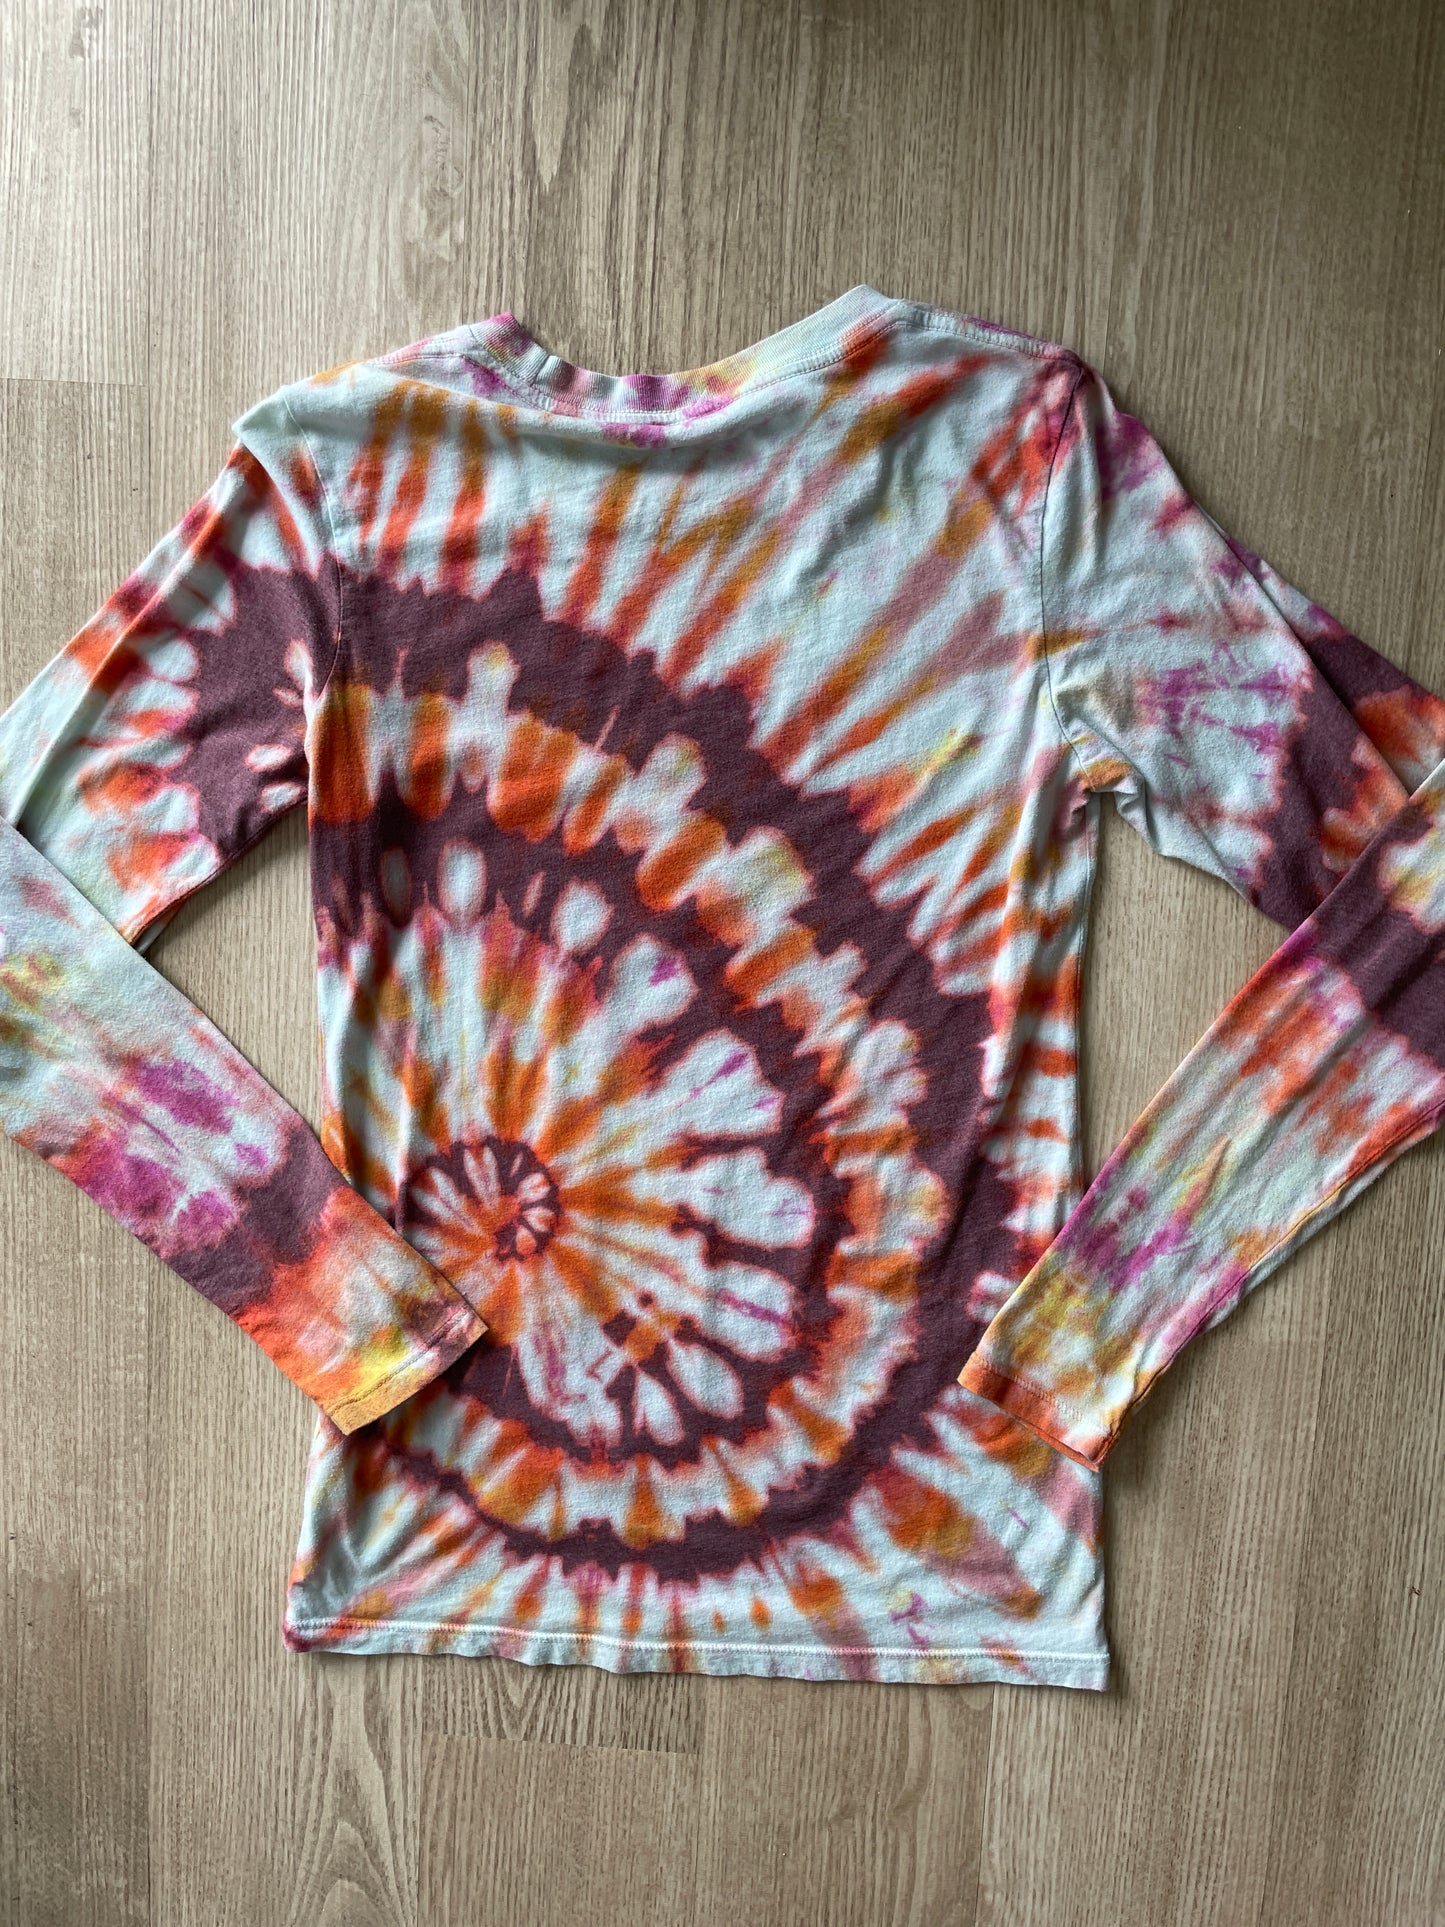 SMALL Women's Moosejaw Handmade Tie Dye T-Shirt | One-Of-a-Kind Pink and White Long Sleeve